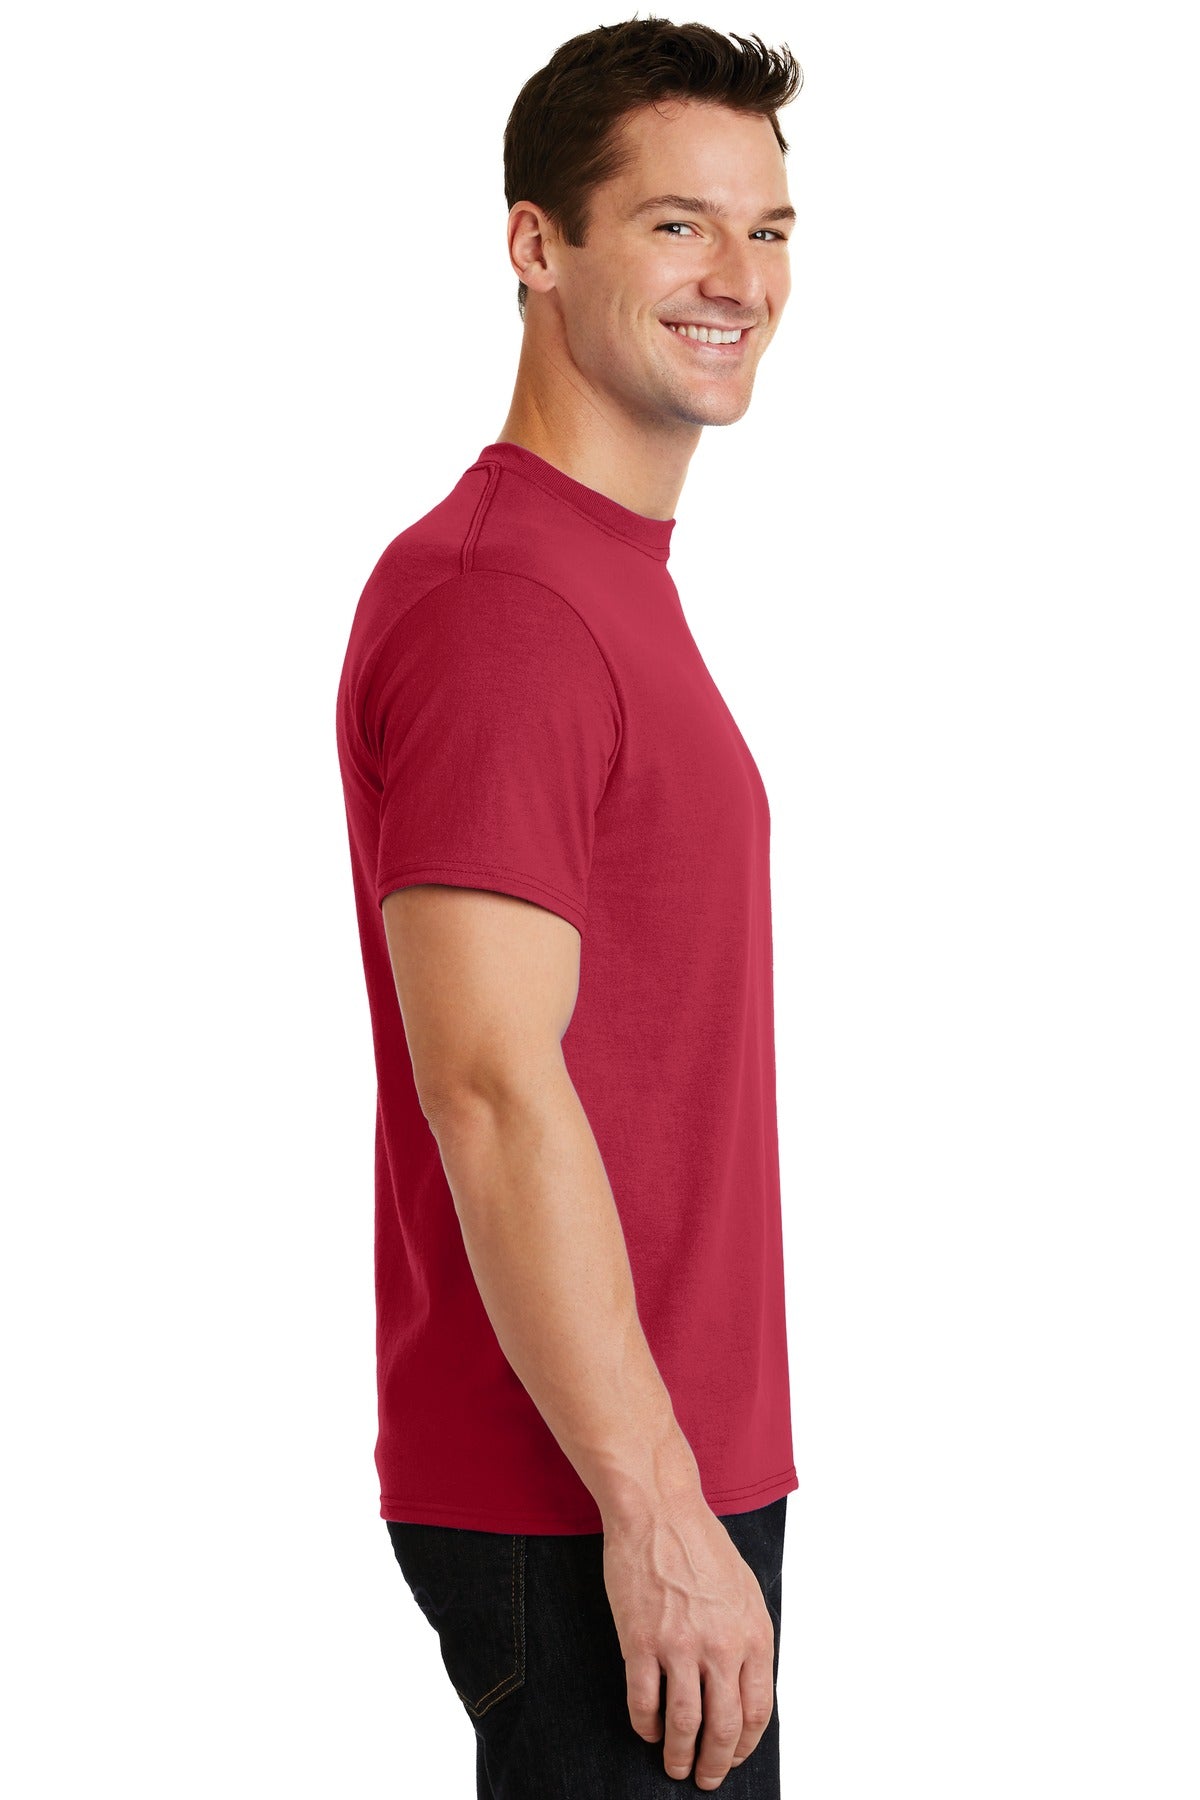 Port & Company® - Core Blend Tee. PC55 [Red] - DFW Impression